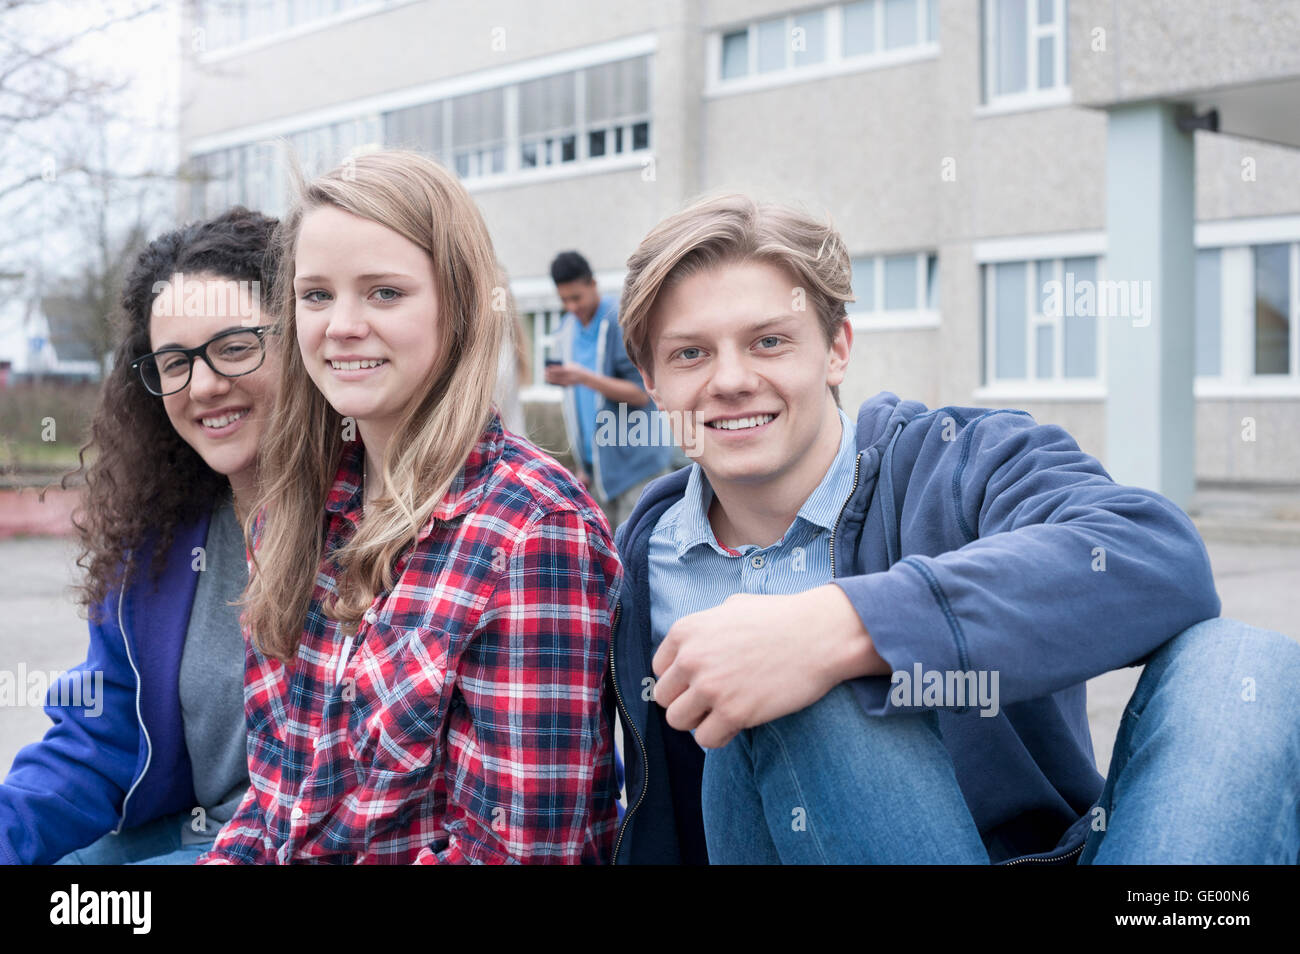 university students sitting in campus and smiling, Bavaria, Germany Stock Photo